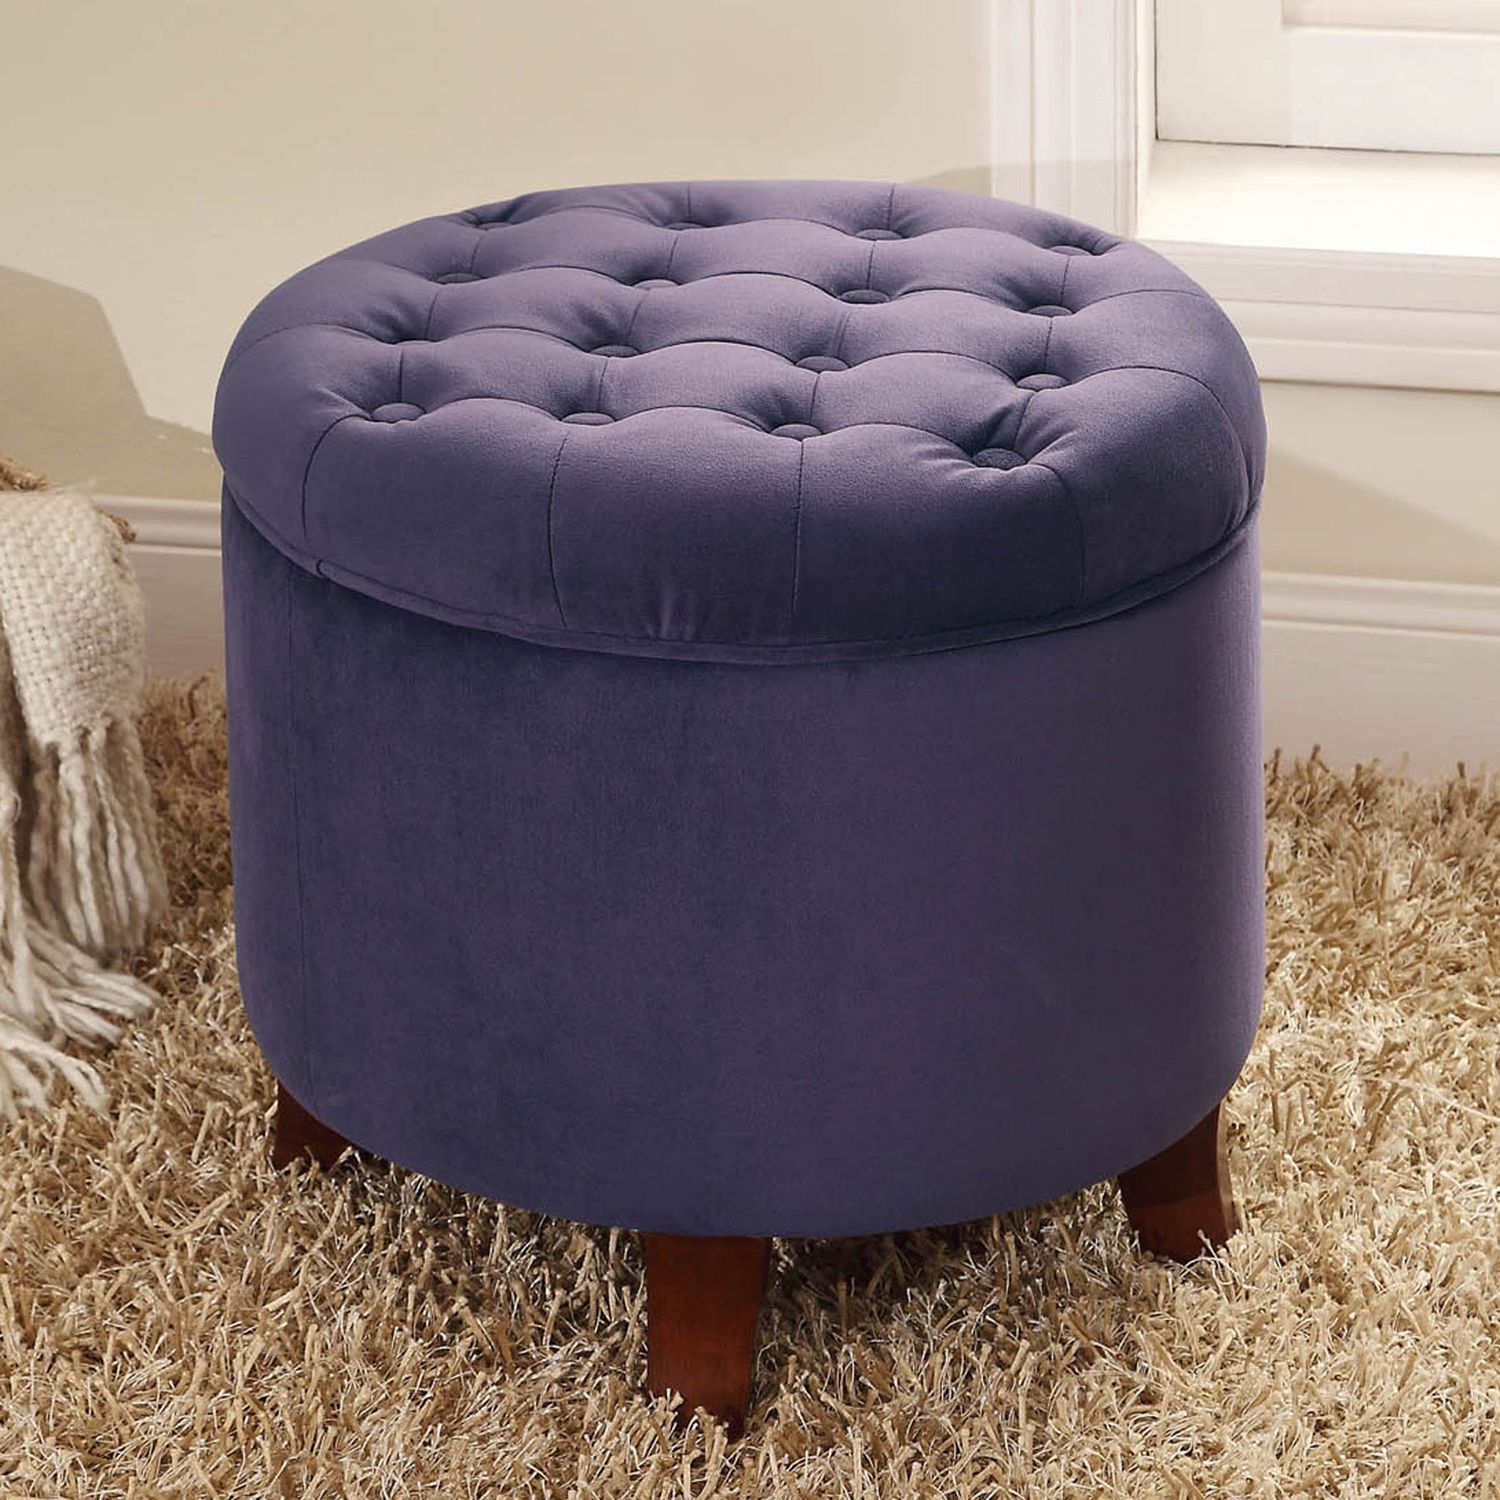 Purple Velvet Tufted Round Storage Ottoman – Pier1 Imports Pertaining To Brown Fabric Tufted Surfboard Ottomans (View 1 of 20)